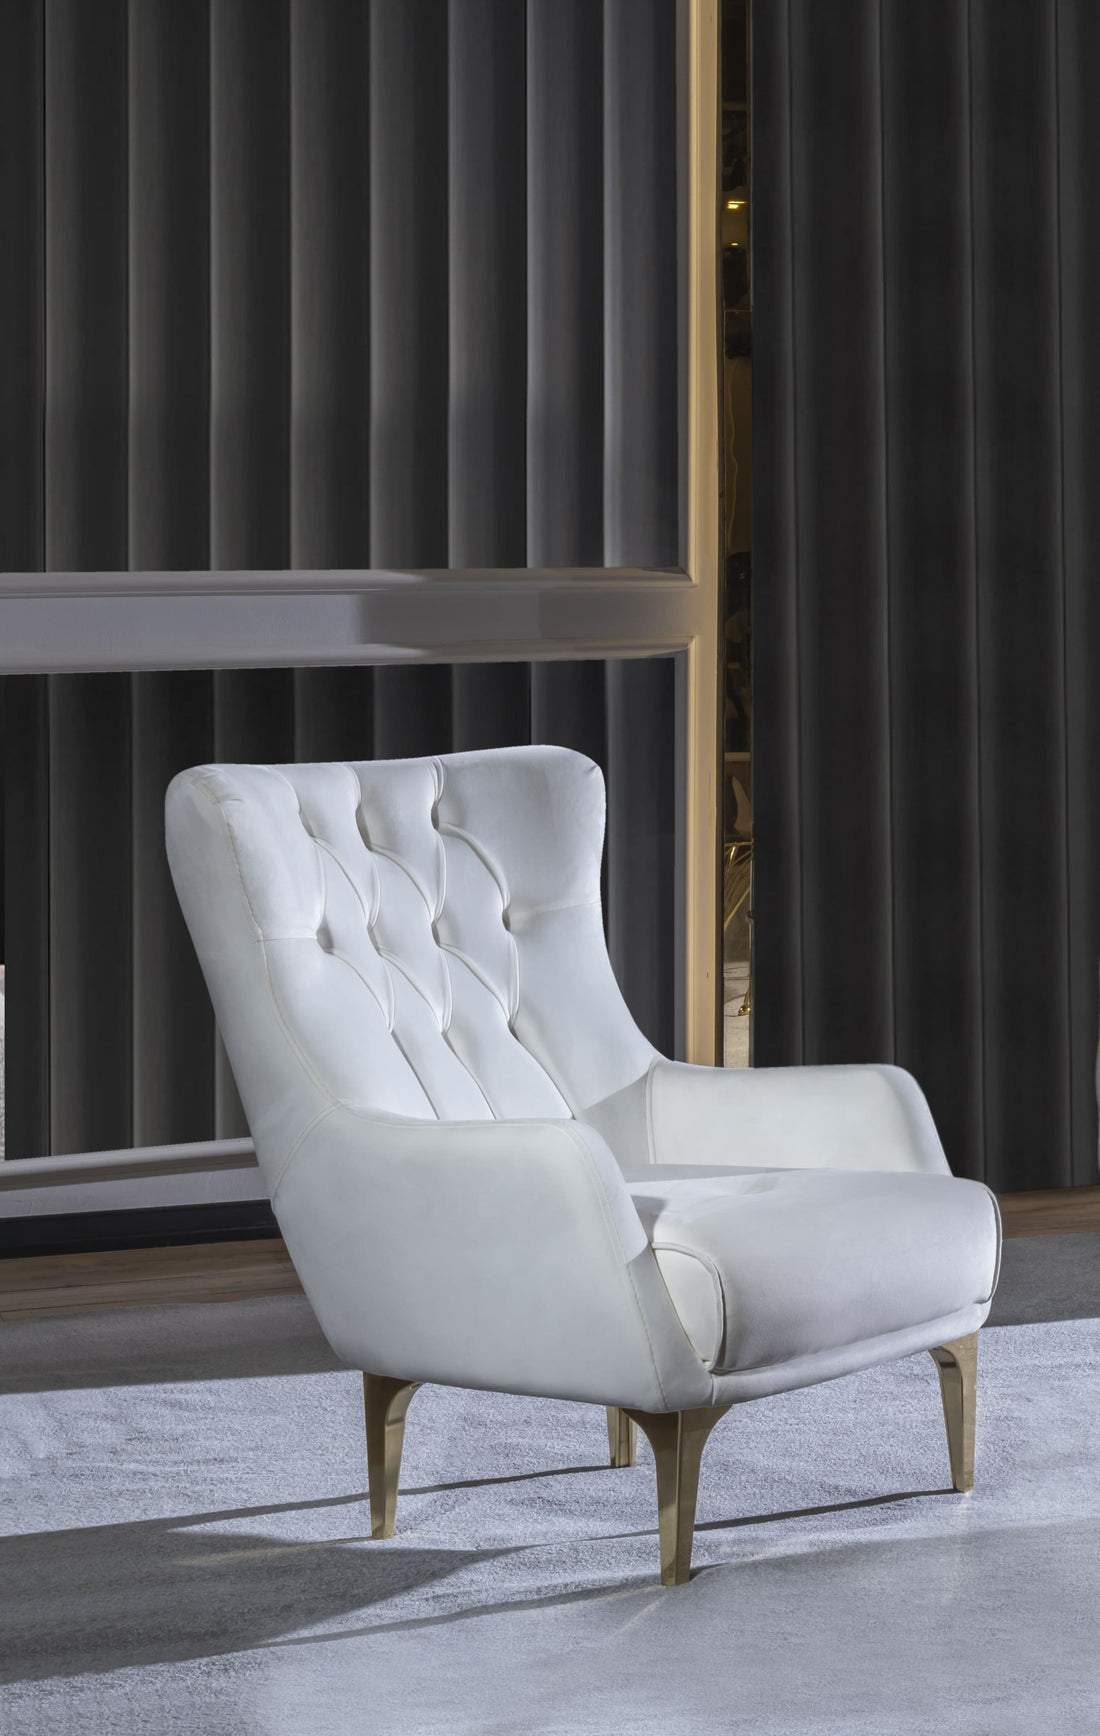 Lust Modern Style Chair in Off White off white-modern-upholstered-wood